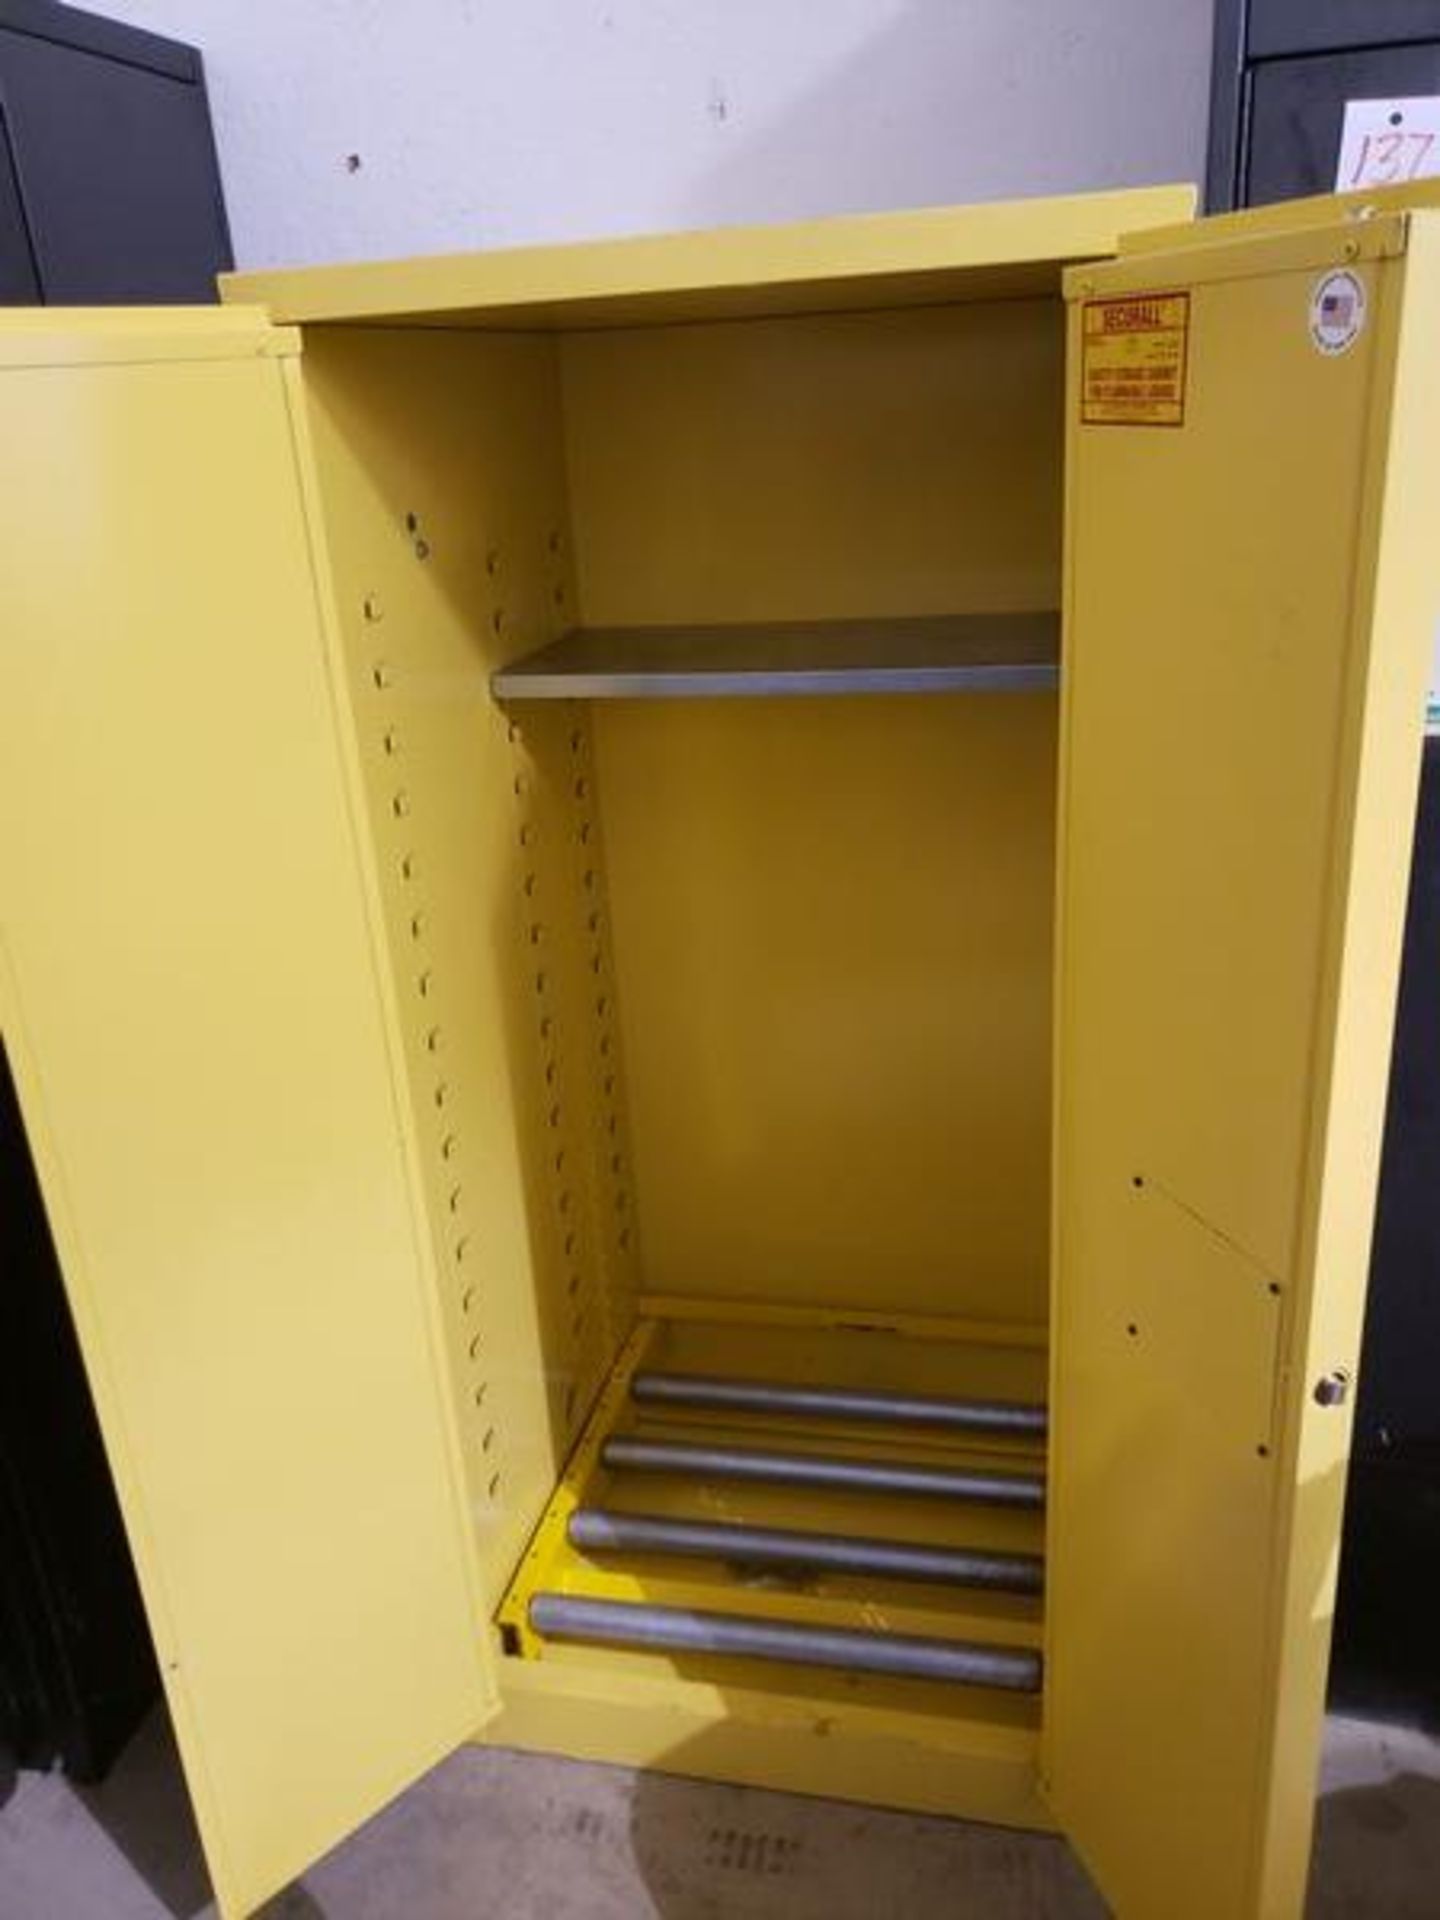 SECURALL MODEL V160 NFPA CODE 30 - DRUM CABINET 31-1/4" X 31" X 65.5" - Image 4 of 4